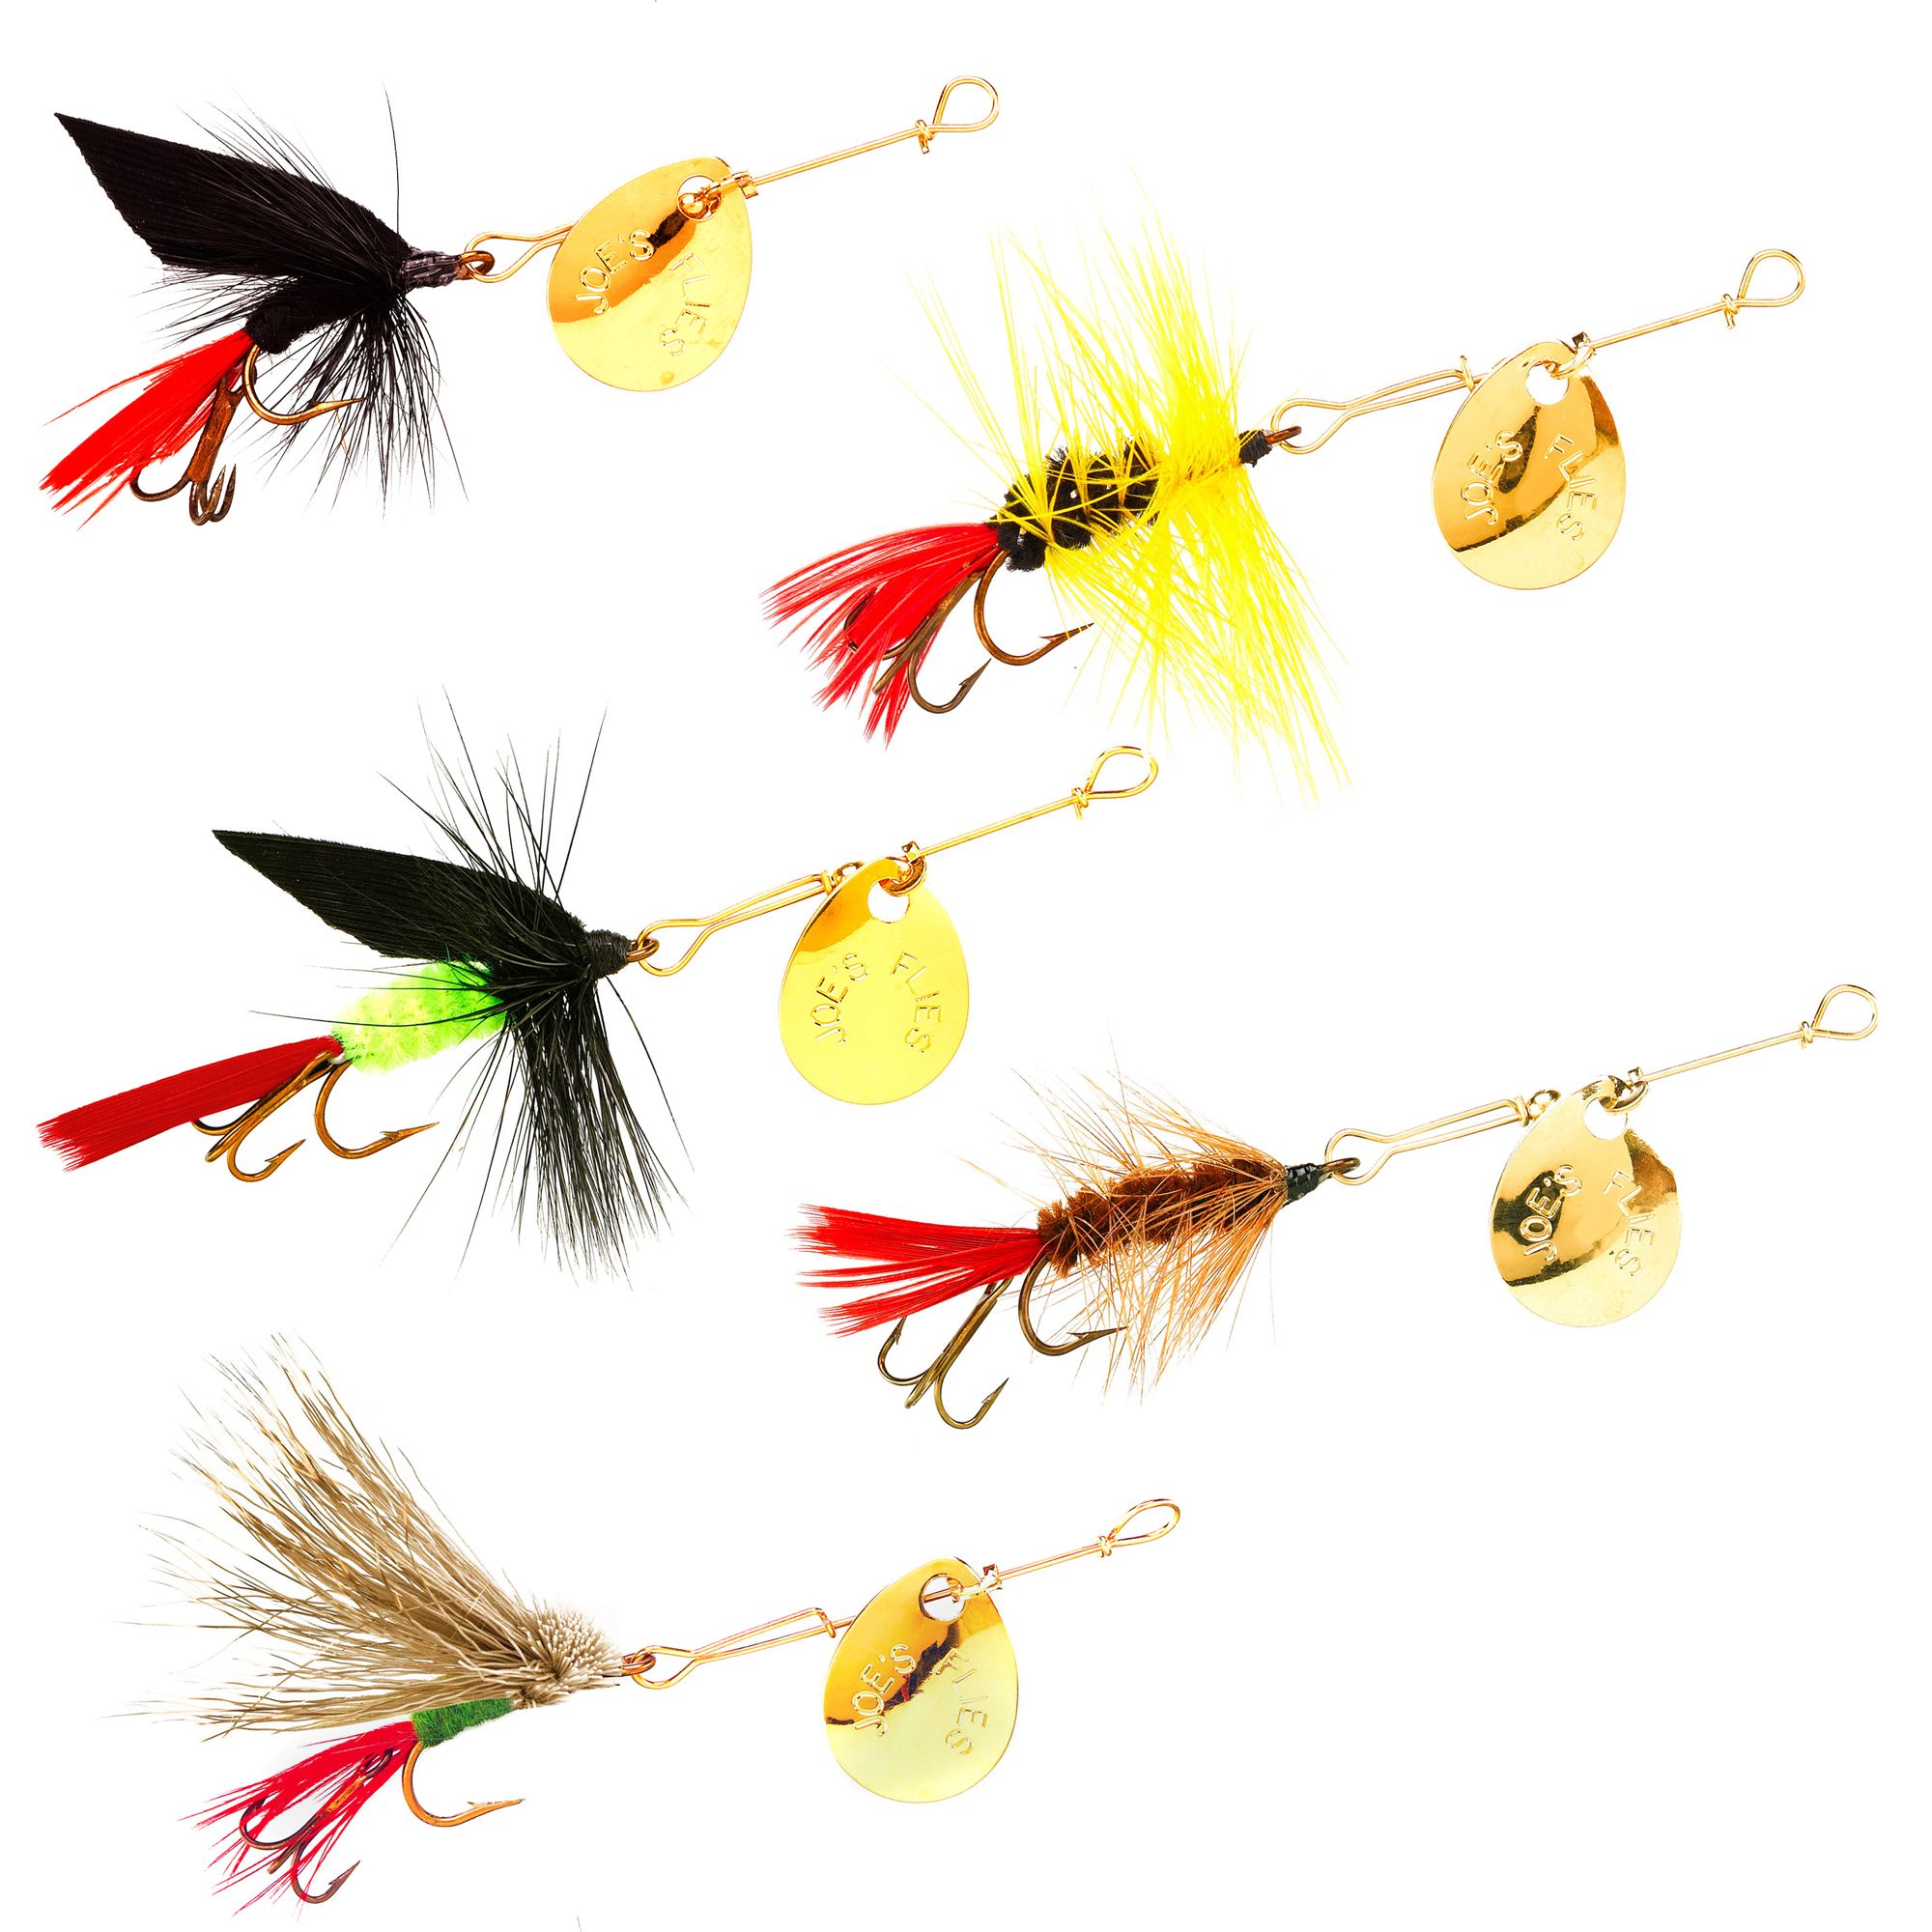 Dick's Sporting Goods Joe's Flies Hot 4 Trout Willow Leaf Spinner Lures